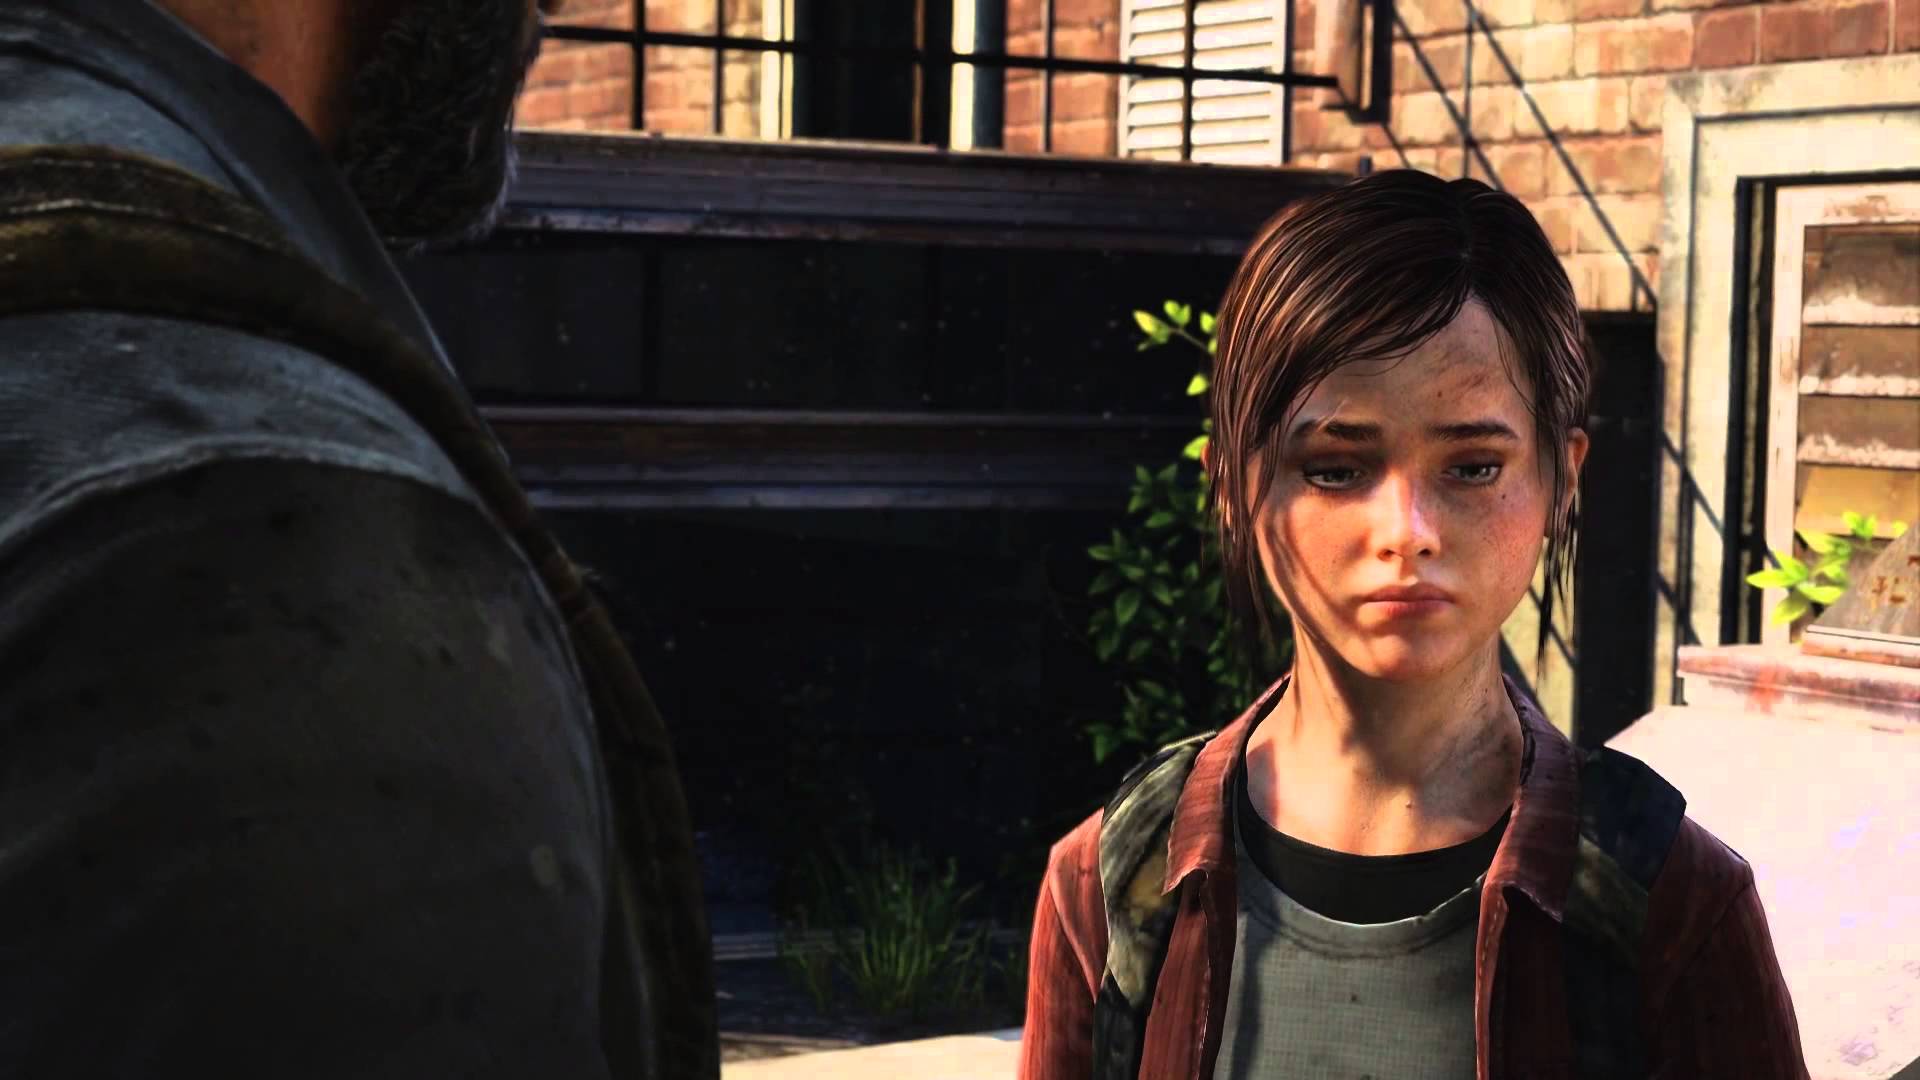 ‘the last of us’ to launch in may 2013